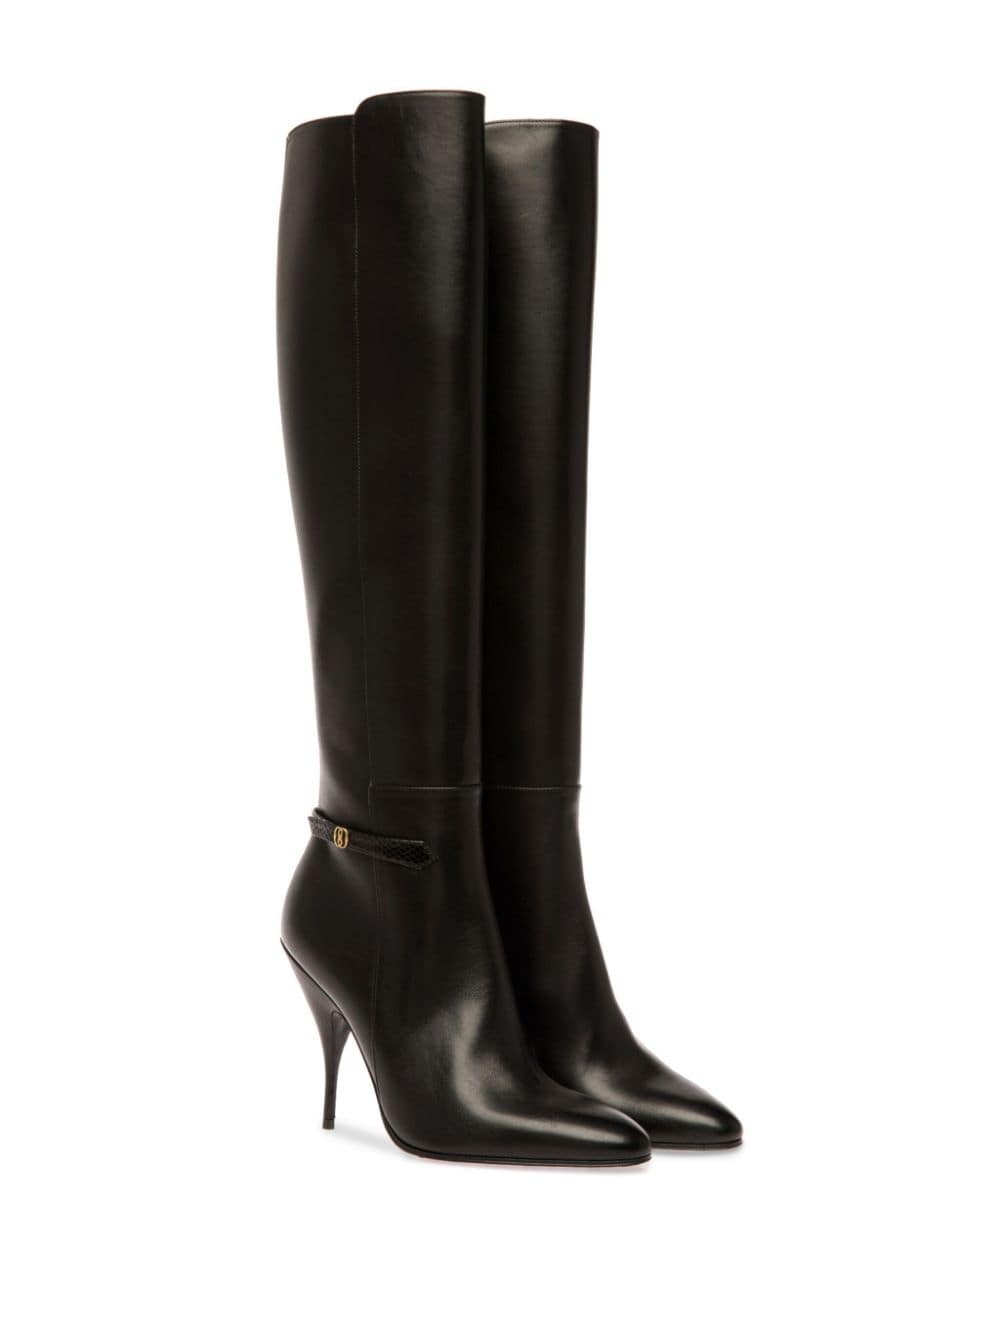 CHANEL Riding Boots 36 - More Than You Can Imagine